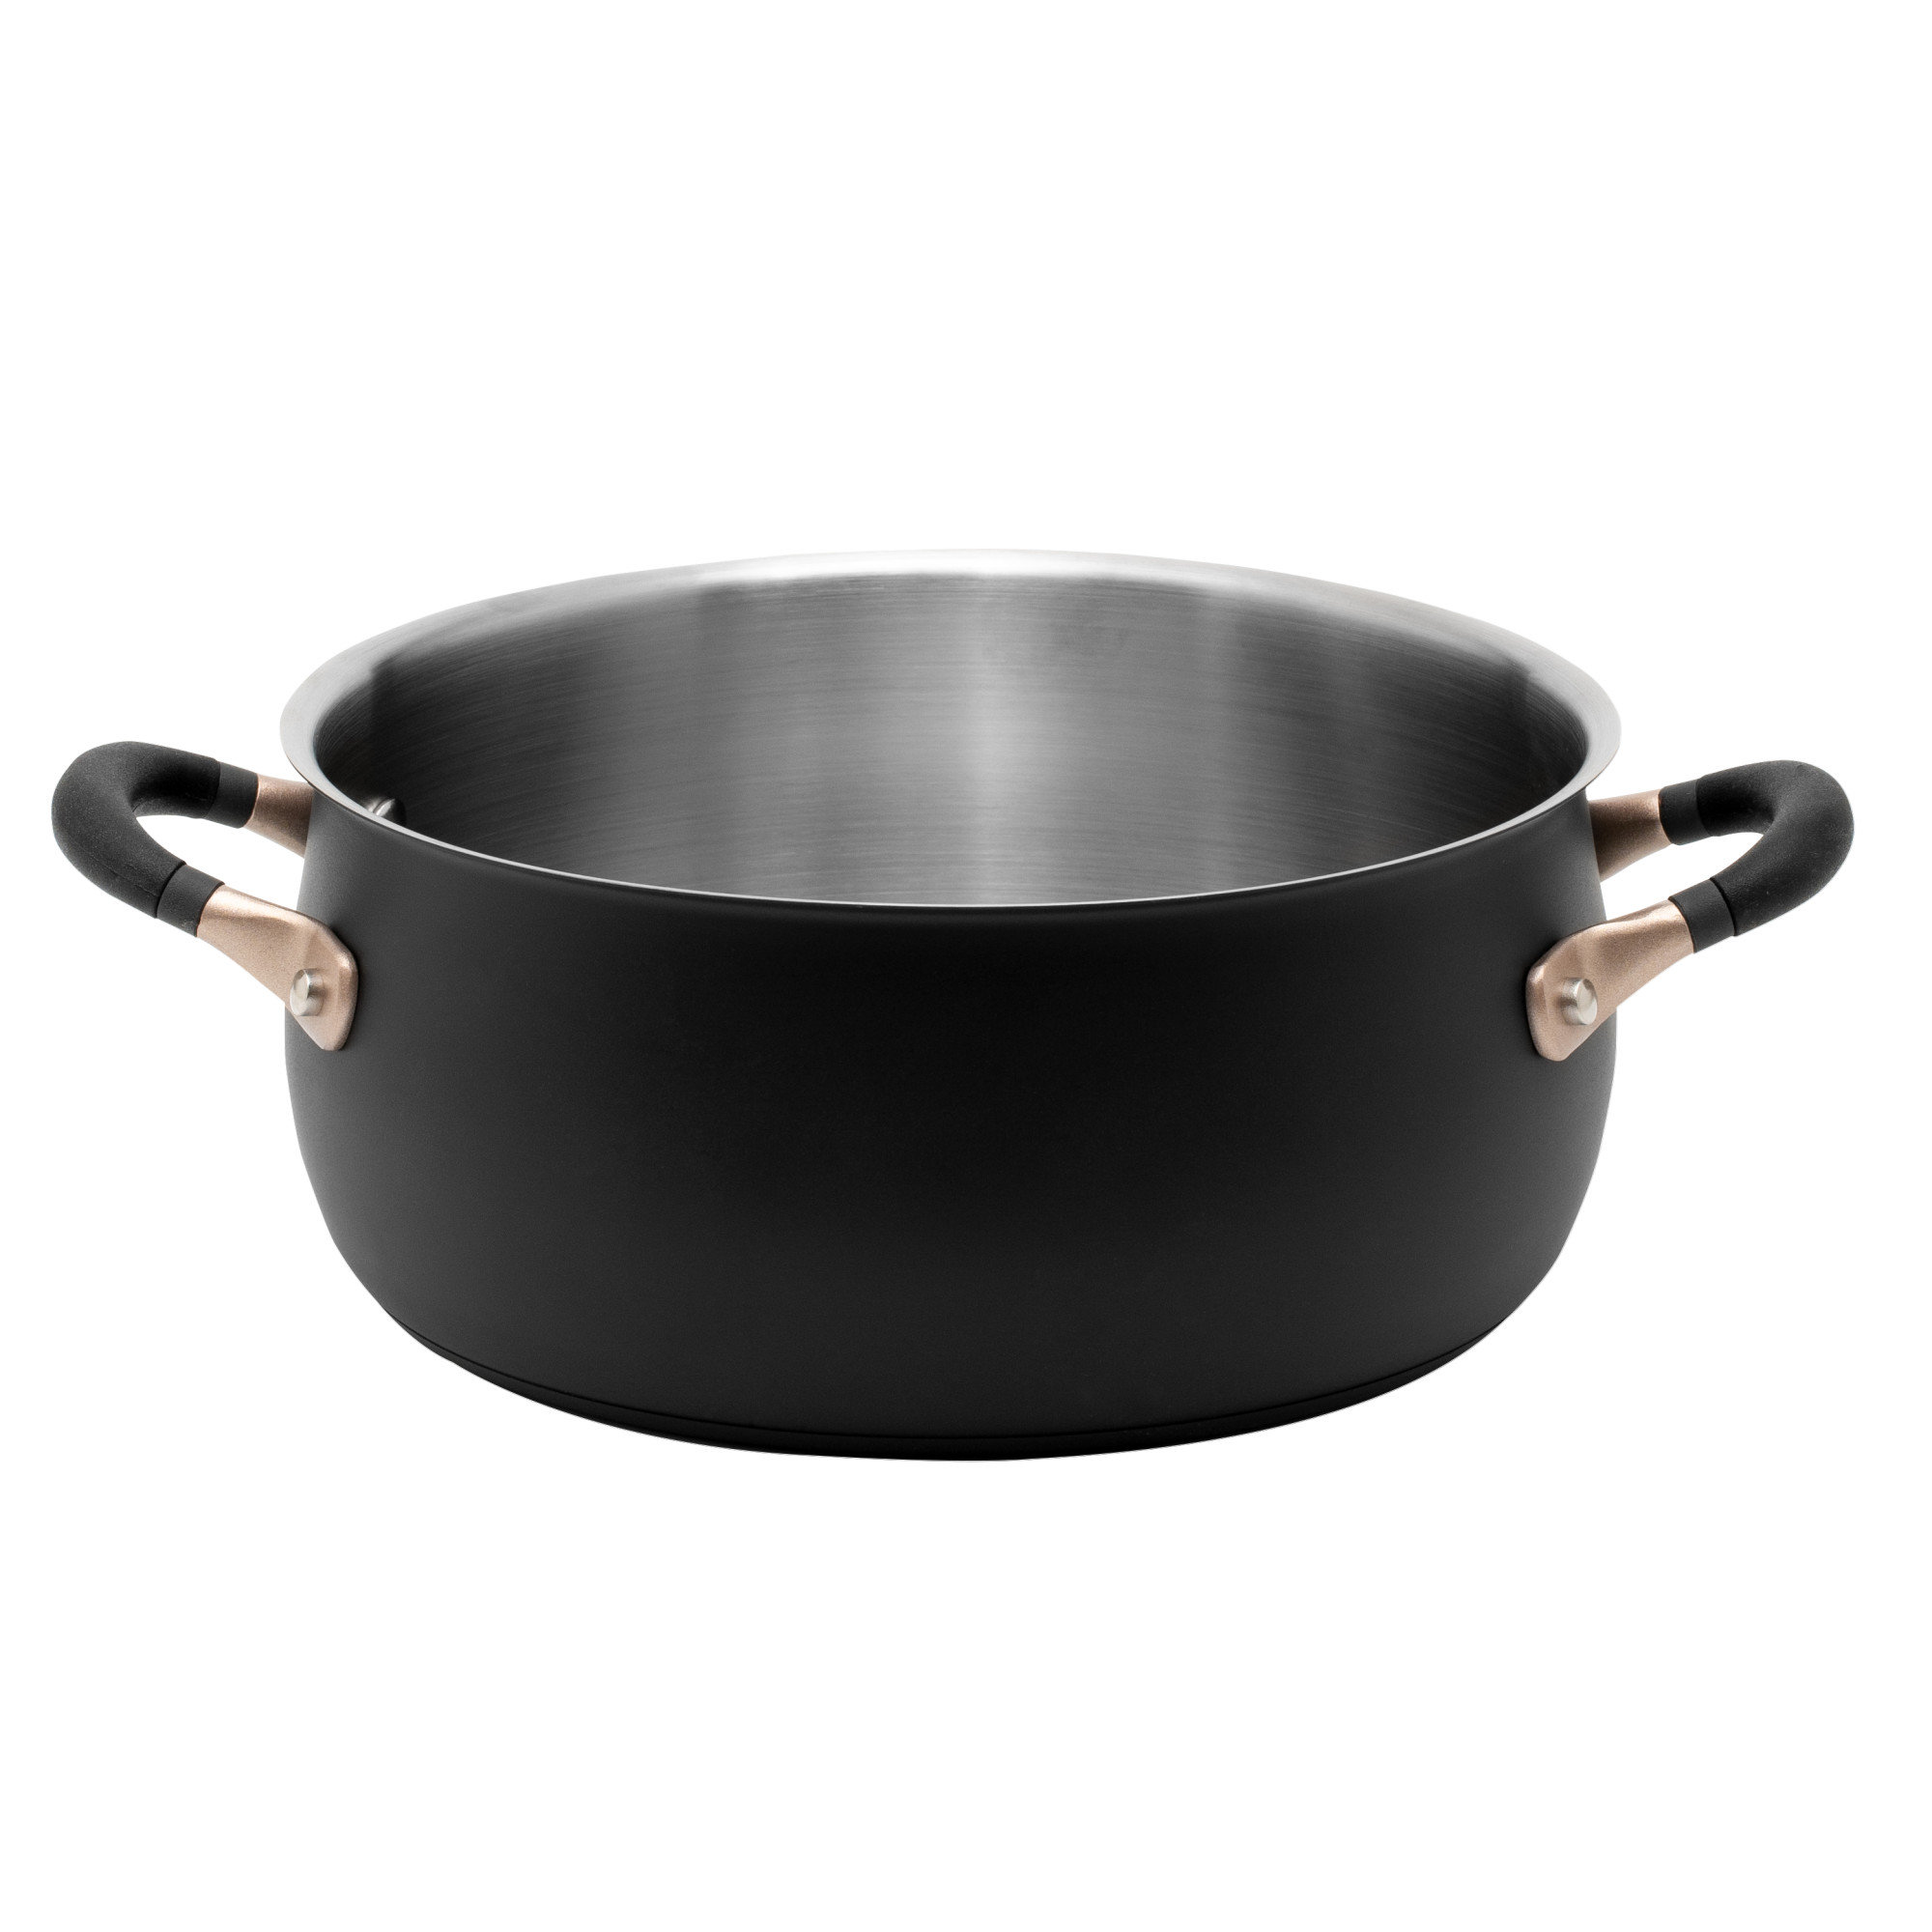 Meyer Cookware - Accent Stainless Steel Dutch Oven